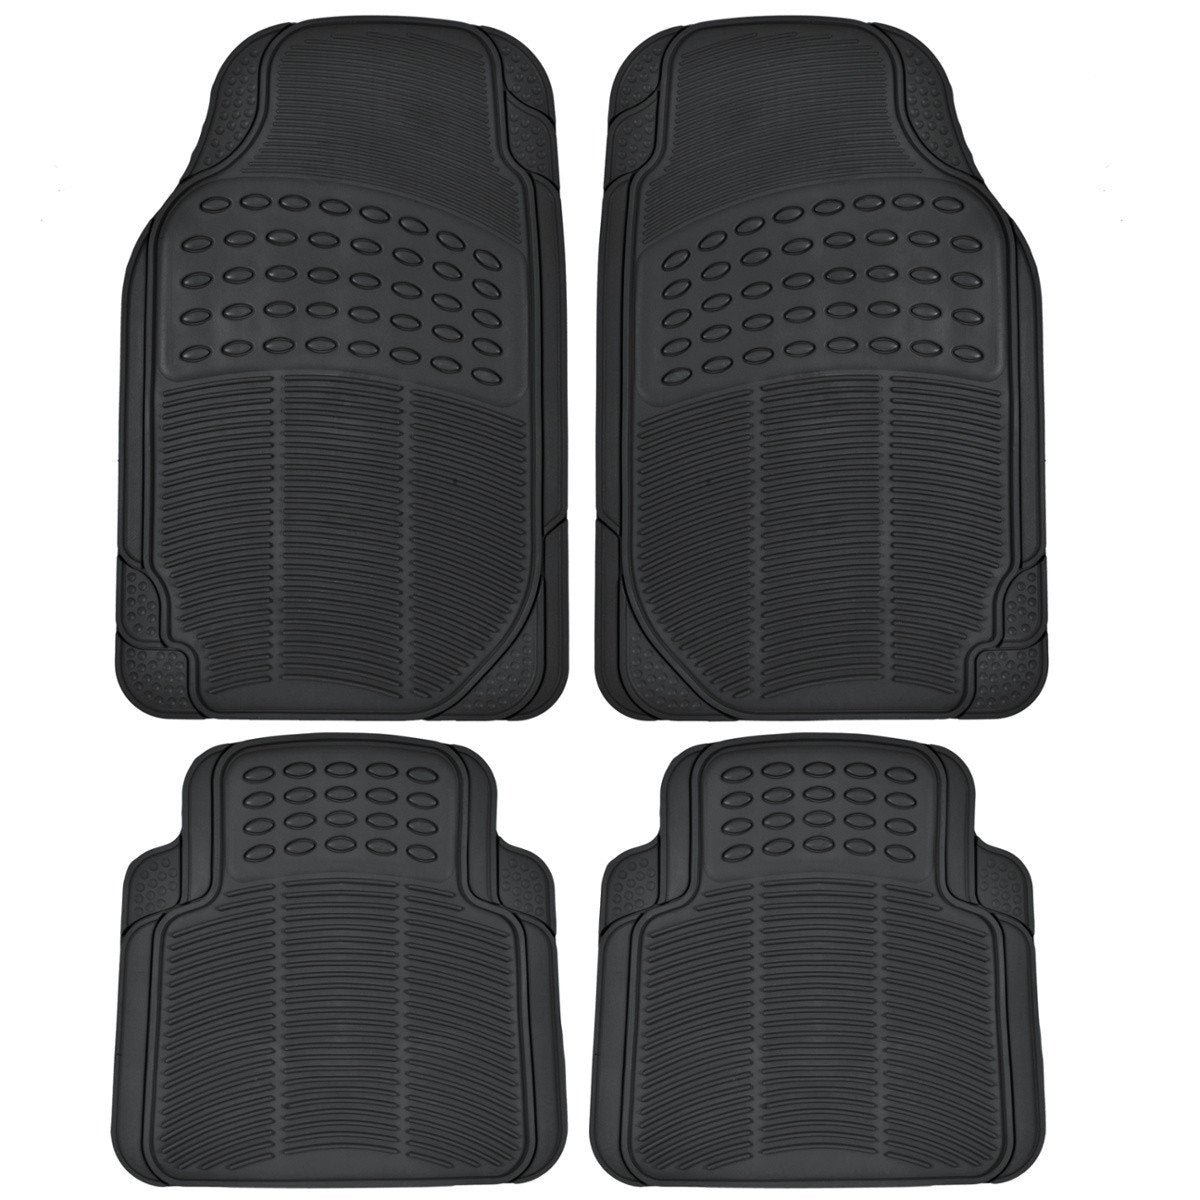 BDK 4-Piece Rubber Transparent Clear Floor Mats Heavy Duty for Front & Rear Car Truck Van SUV, All Weather Protection, Universal Fit